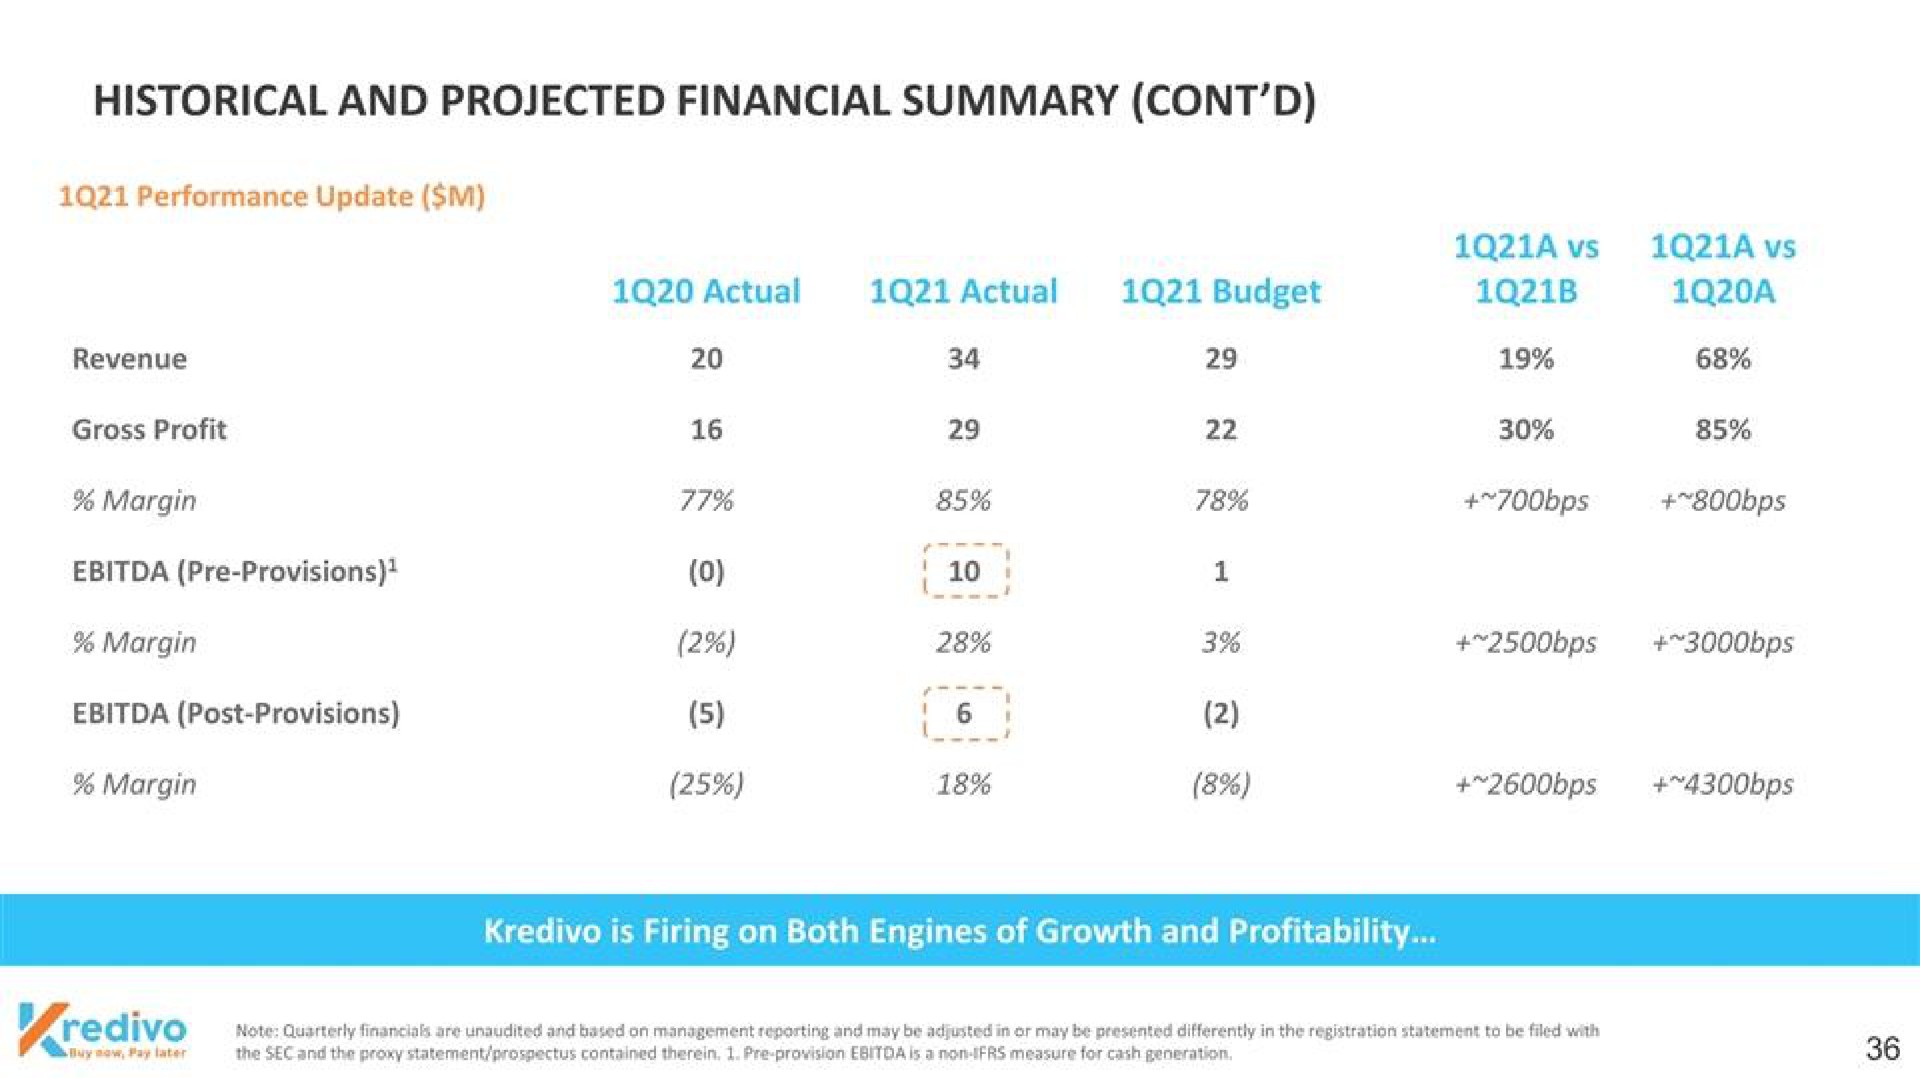 historical and projected financial summary post provisions | Kredivo